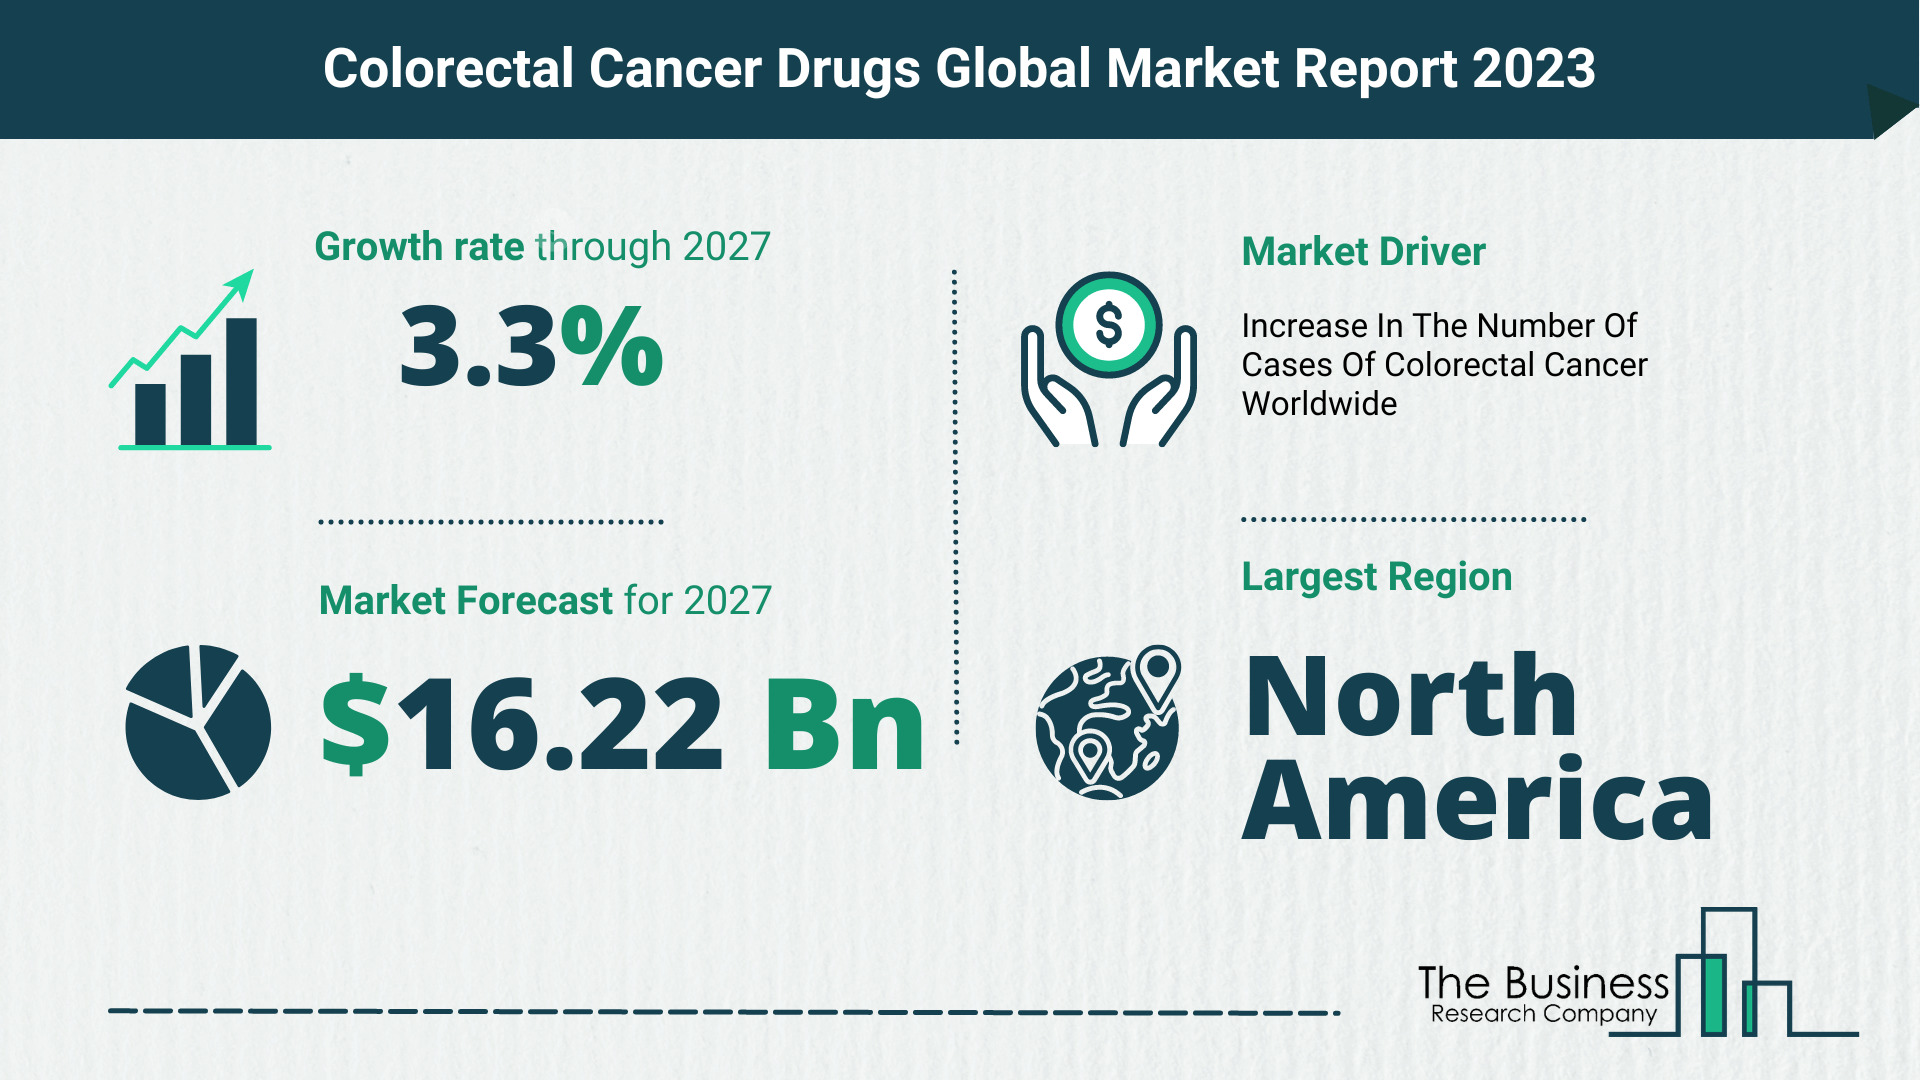 How Will The Colorectal Cancer Drugs Market Globally Expand In 2023?